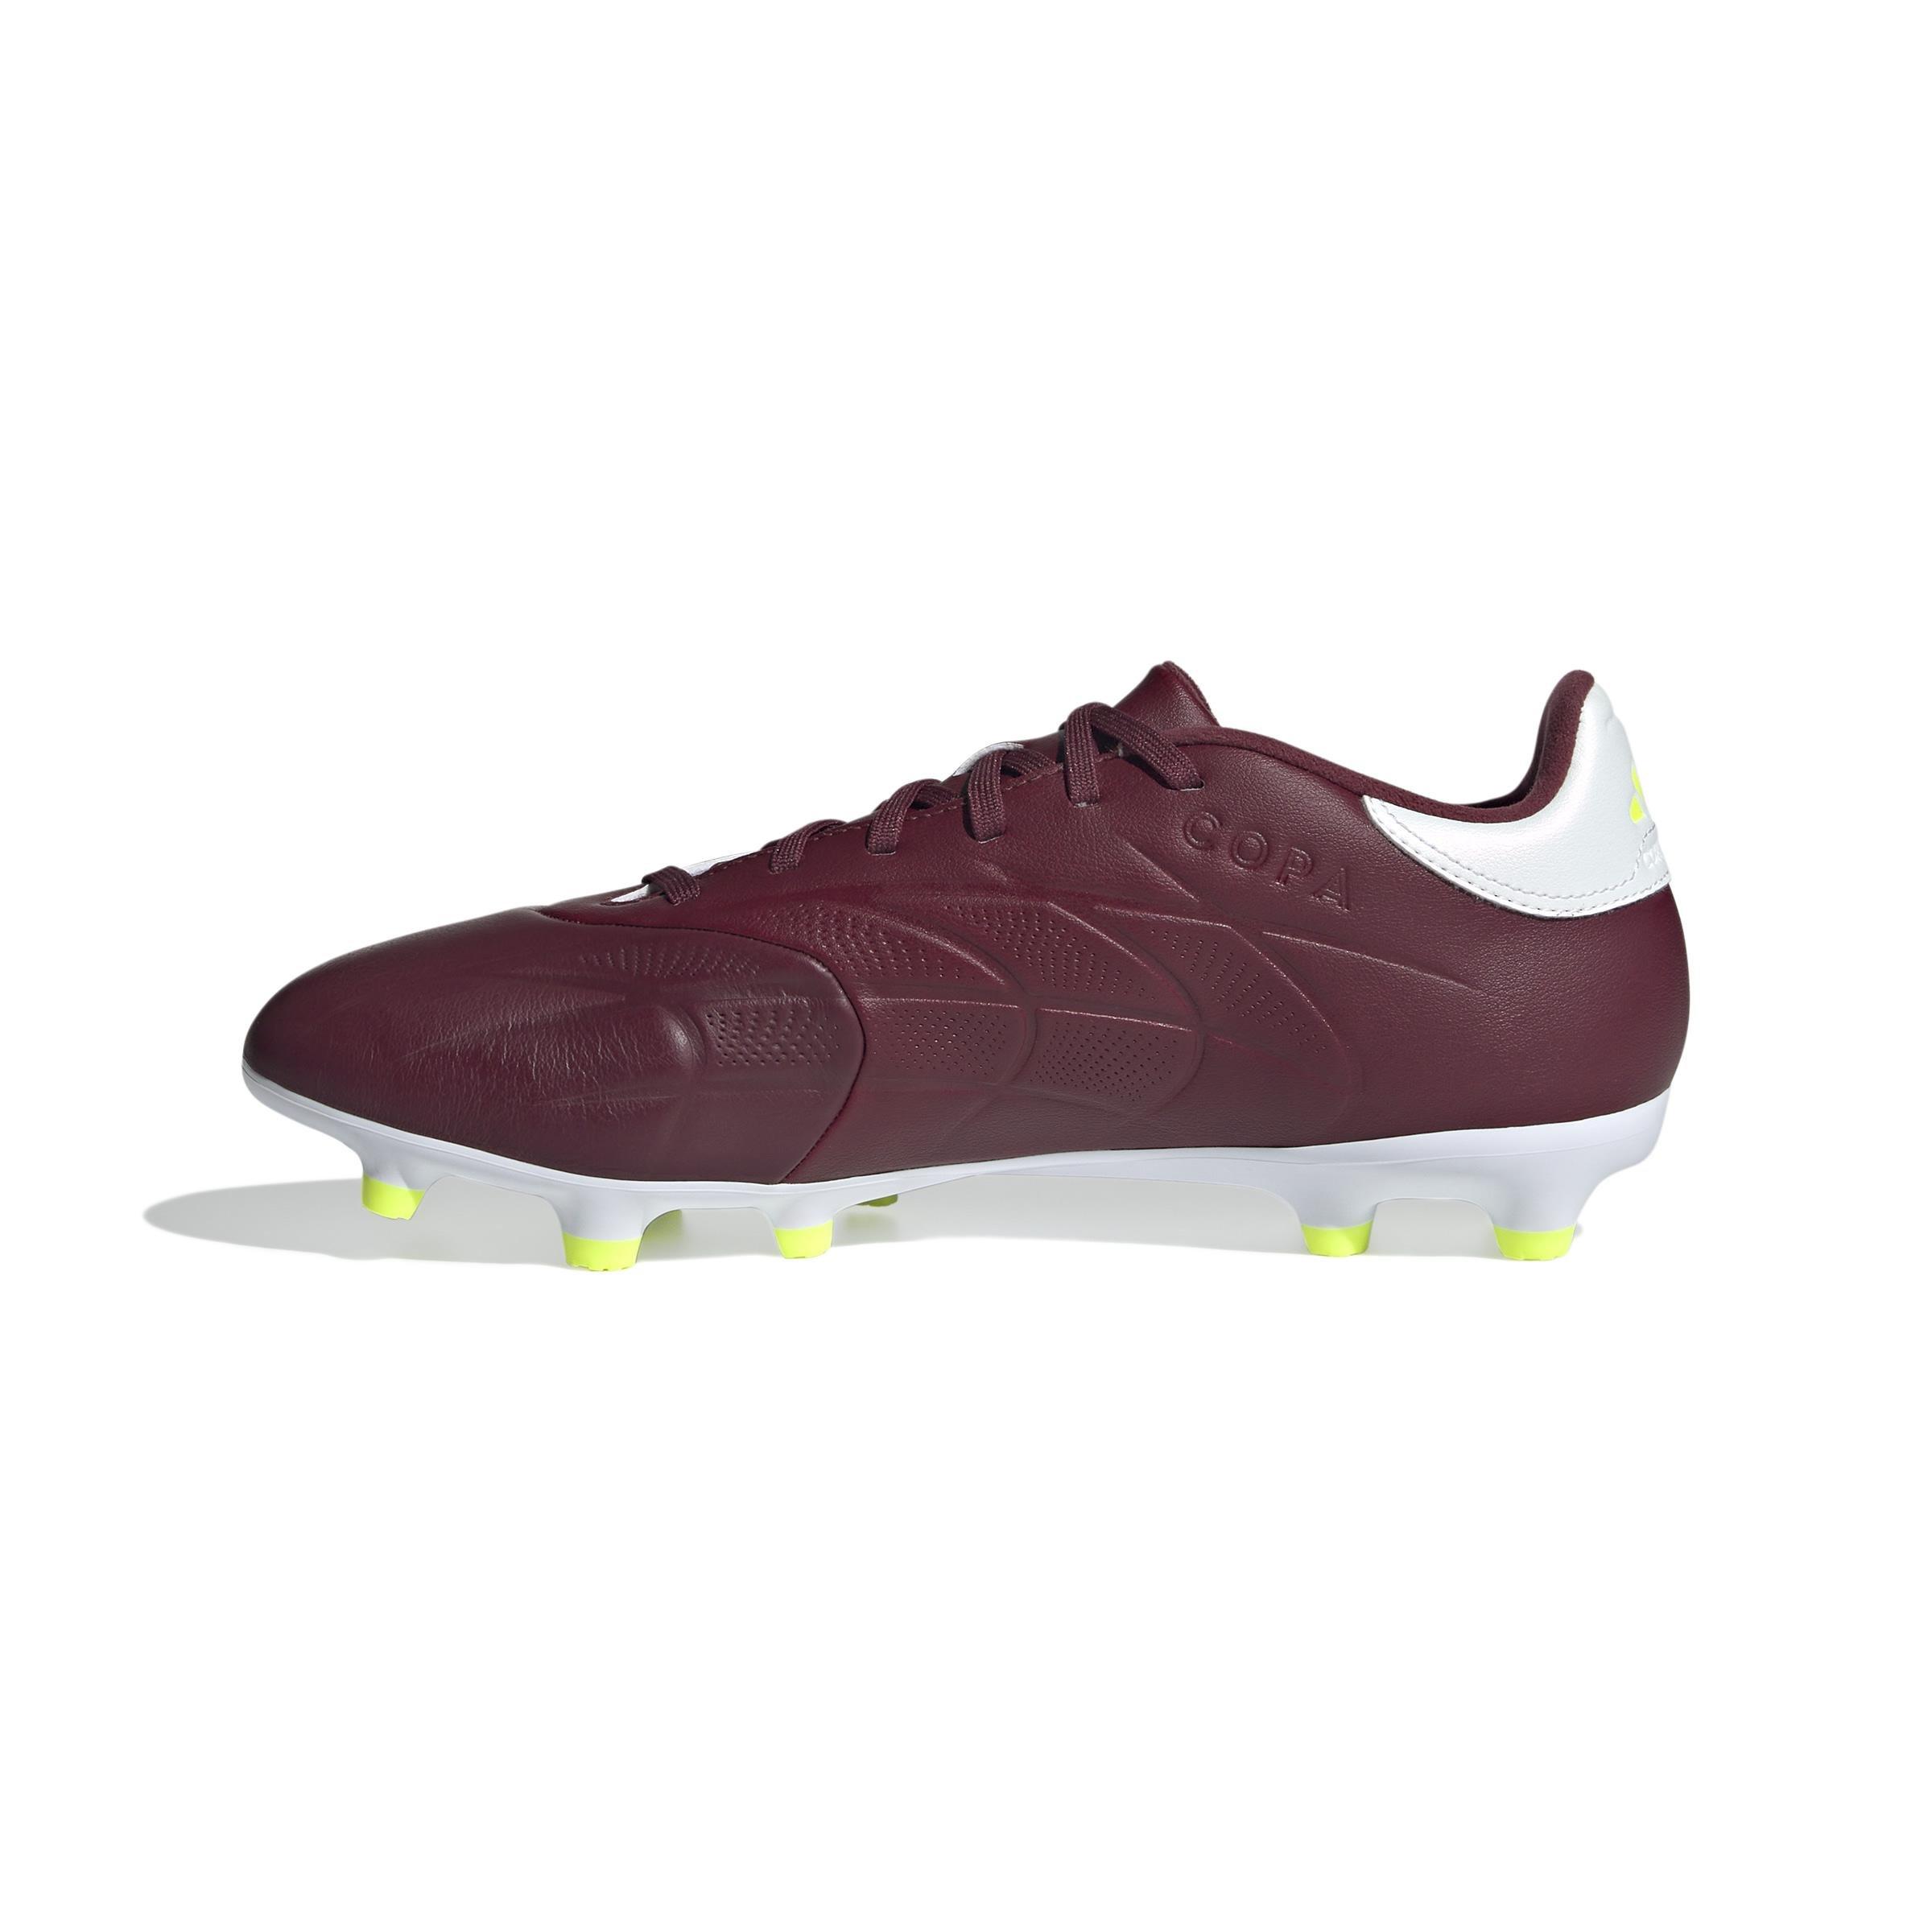 adidas - Unisex Copa Pure Ii League Firm Ground Boots, Burgundy